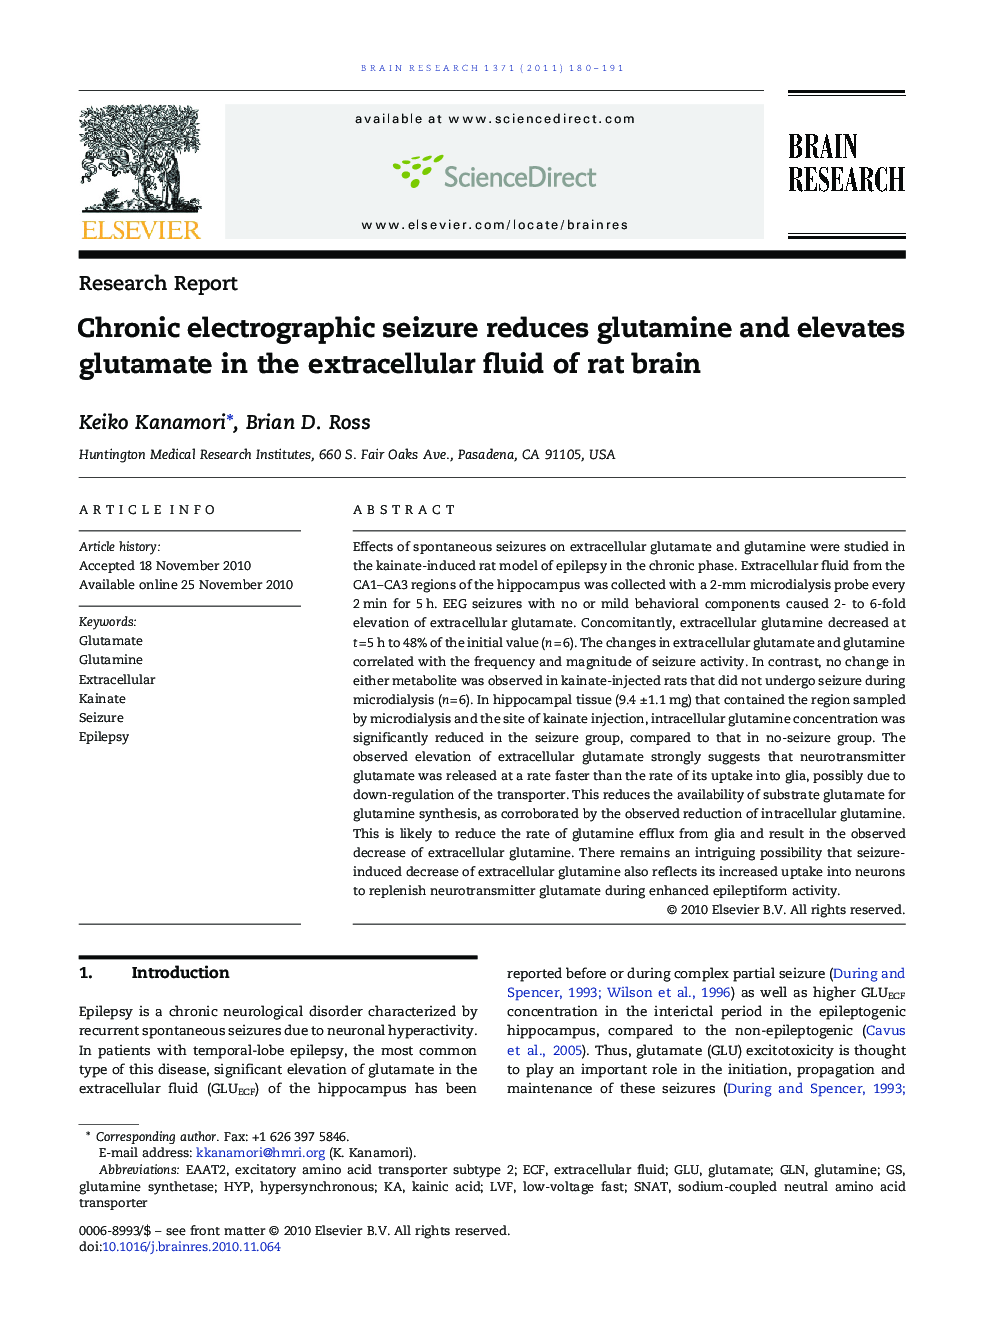 Research ReportChronic electrographic seizure reduces glutamine and elevates glutamate in the extracellular fluid of rat brain